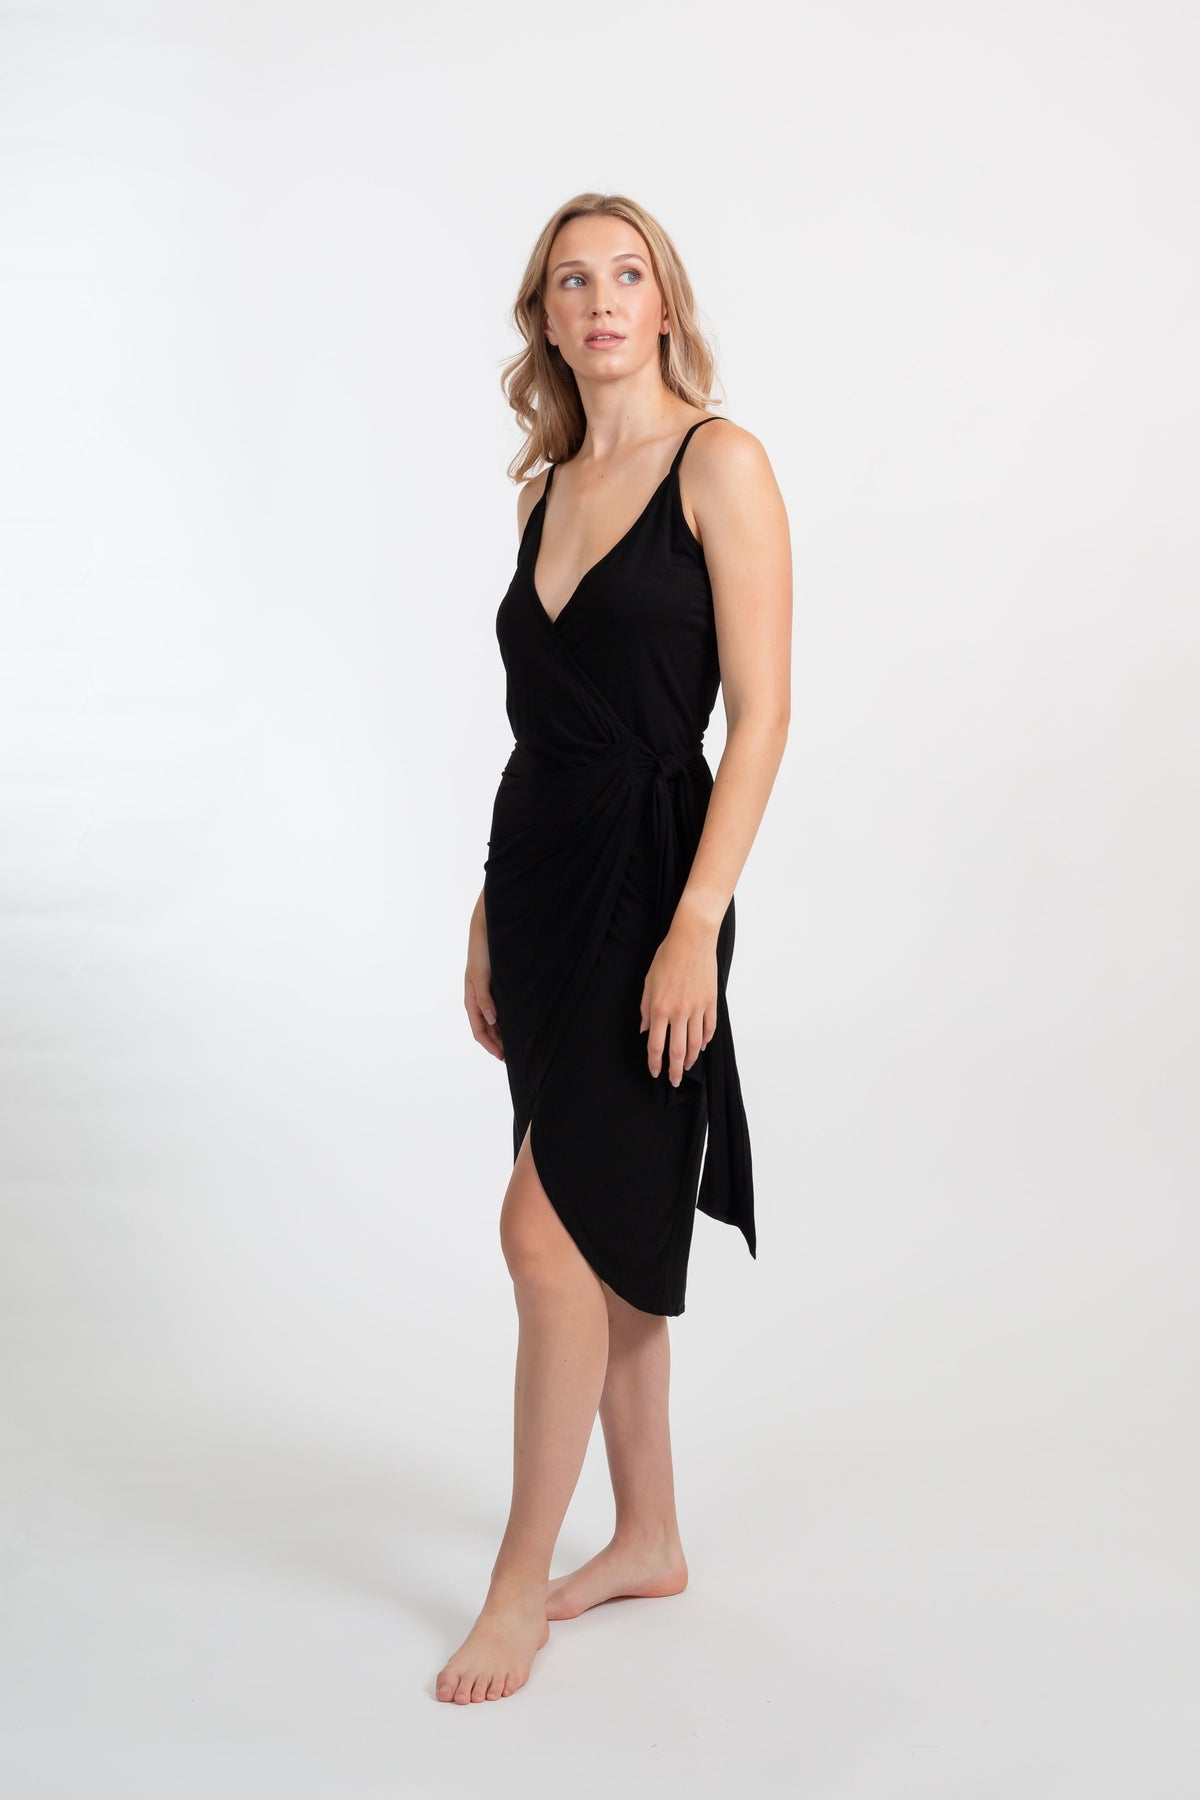 a blonde hair female model showing the side of the black spaghetti strap dress from Koy Resort looking up